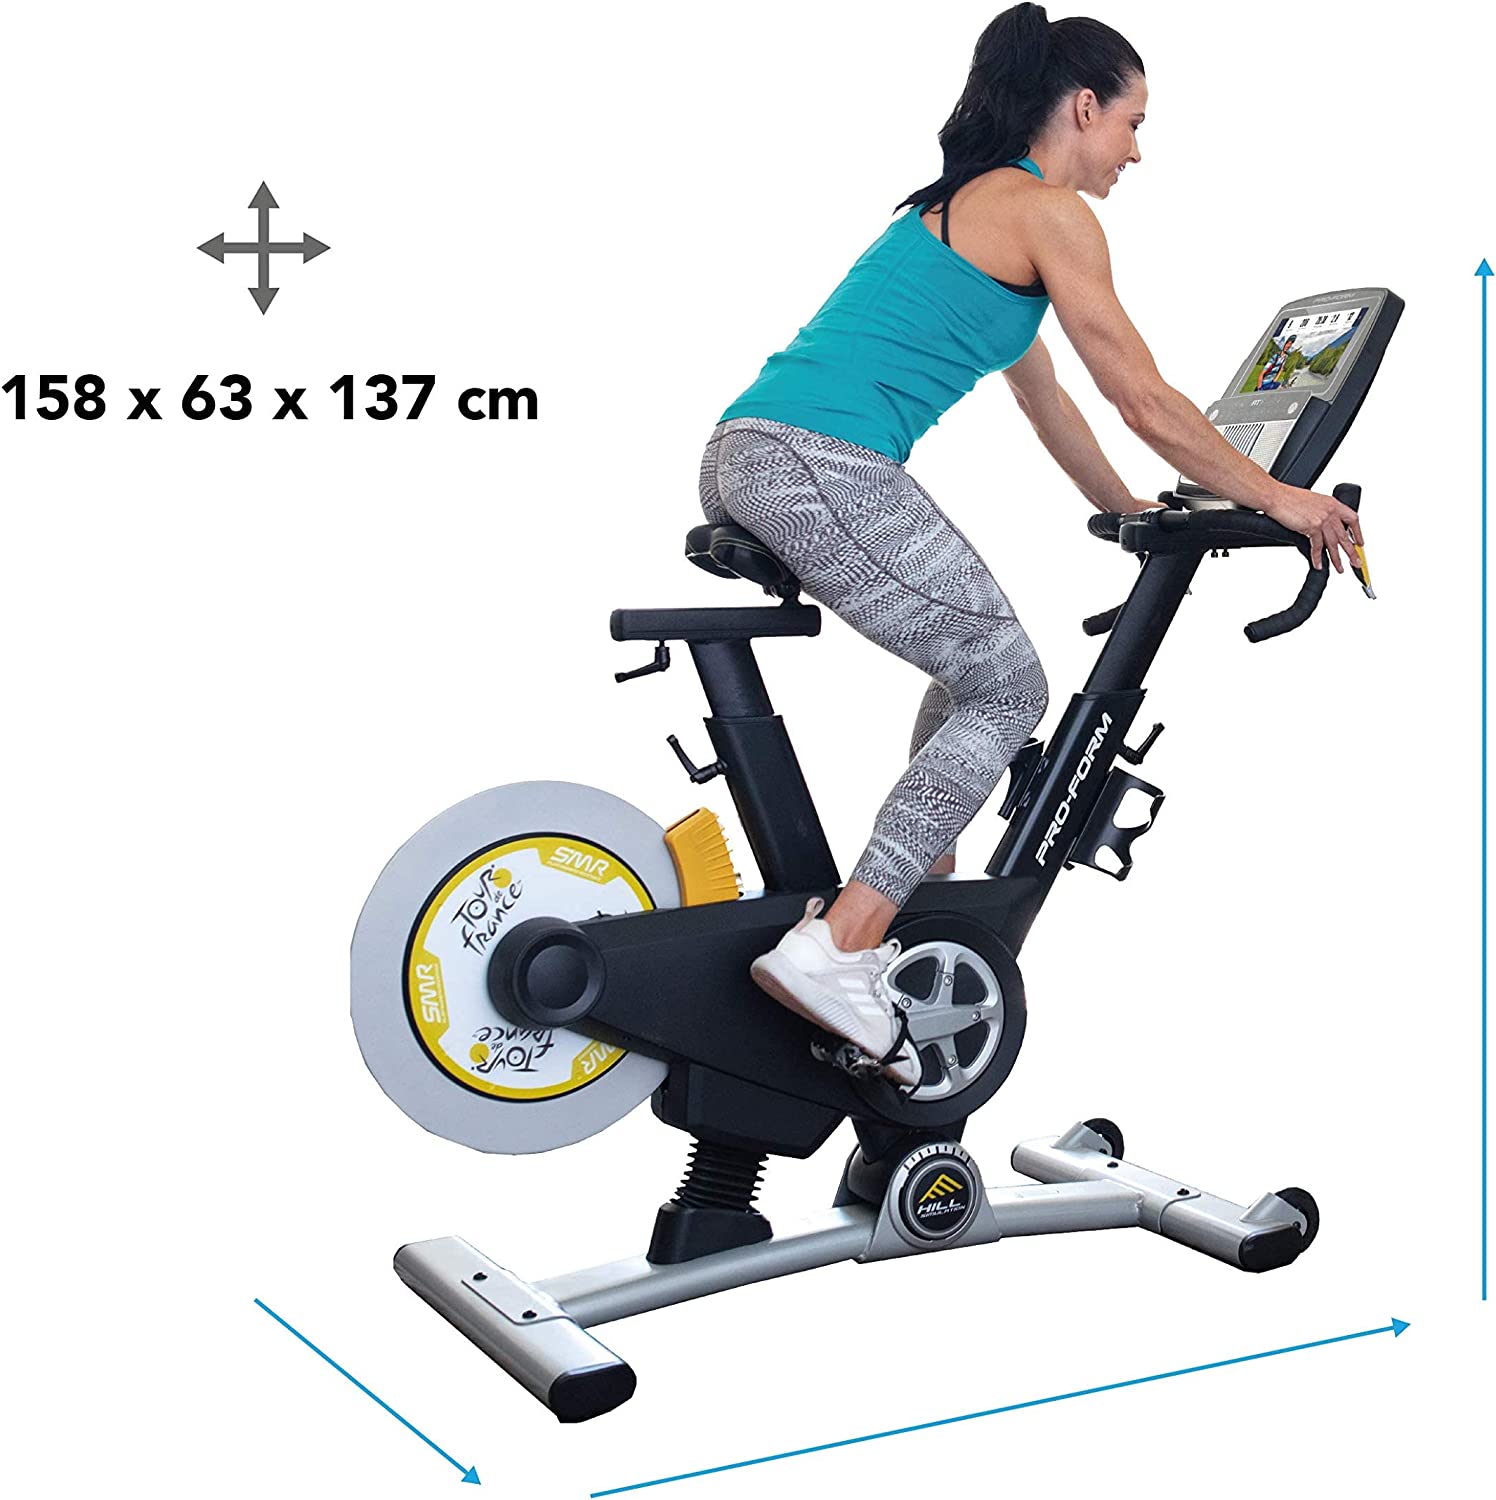 Proform Tour de France 10.0 Exercise Bike Spinning Bike - with a female model cycling